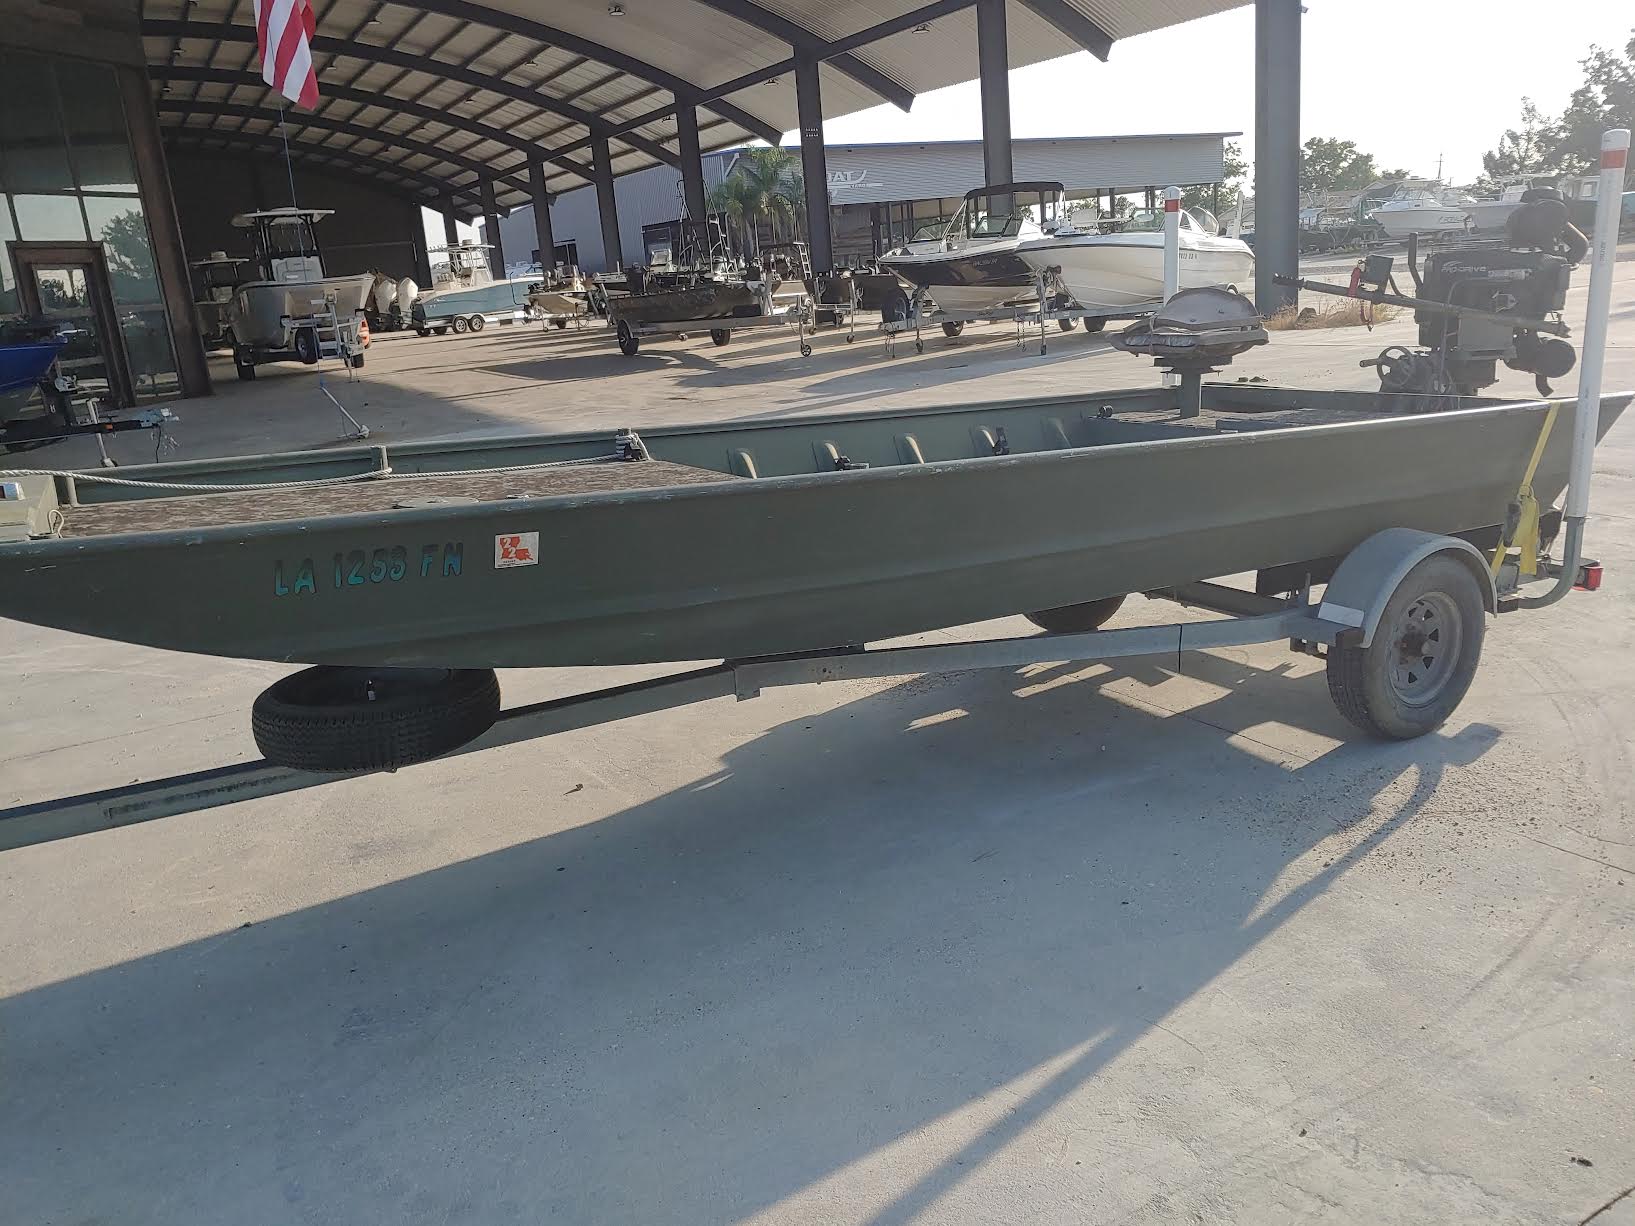 2006 Alweld boat for sale, model of the boat is 16Ft & Image # 4 of 4